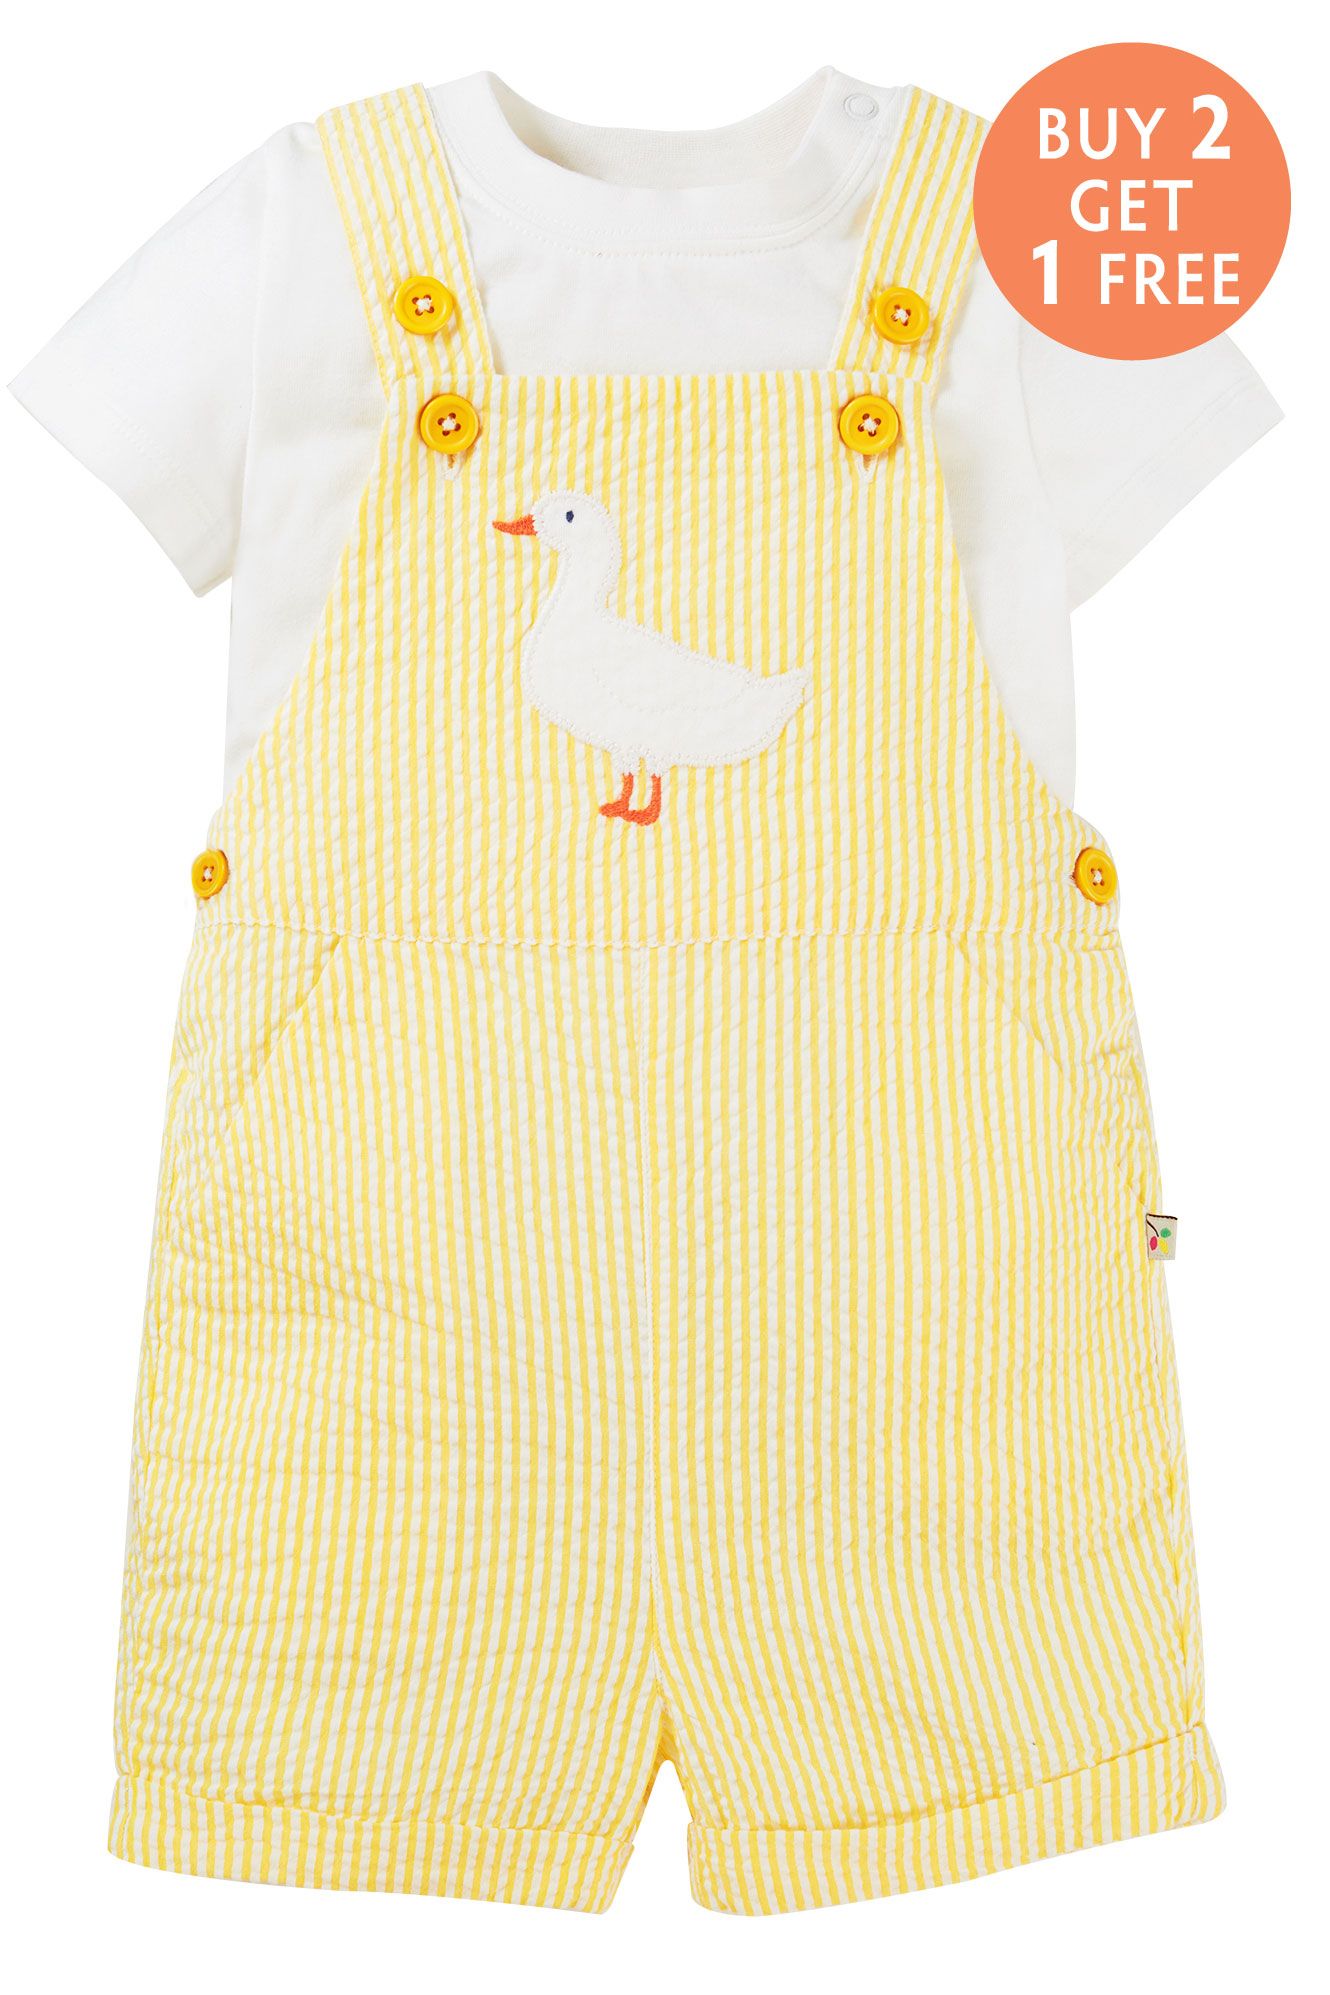 Godrevy Dungaree Outfit